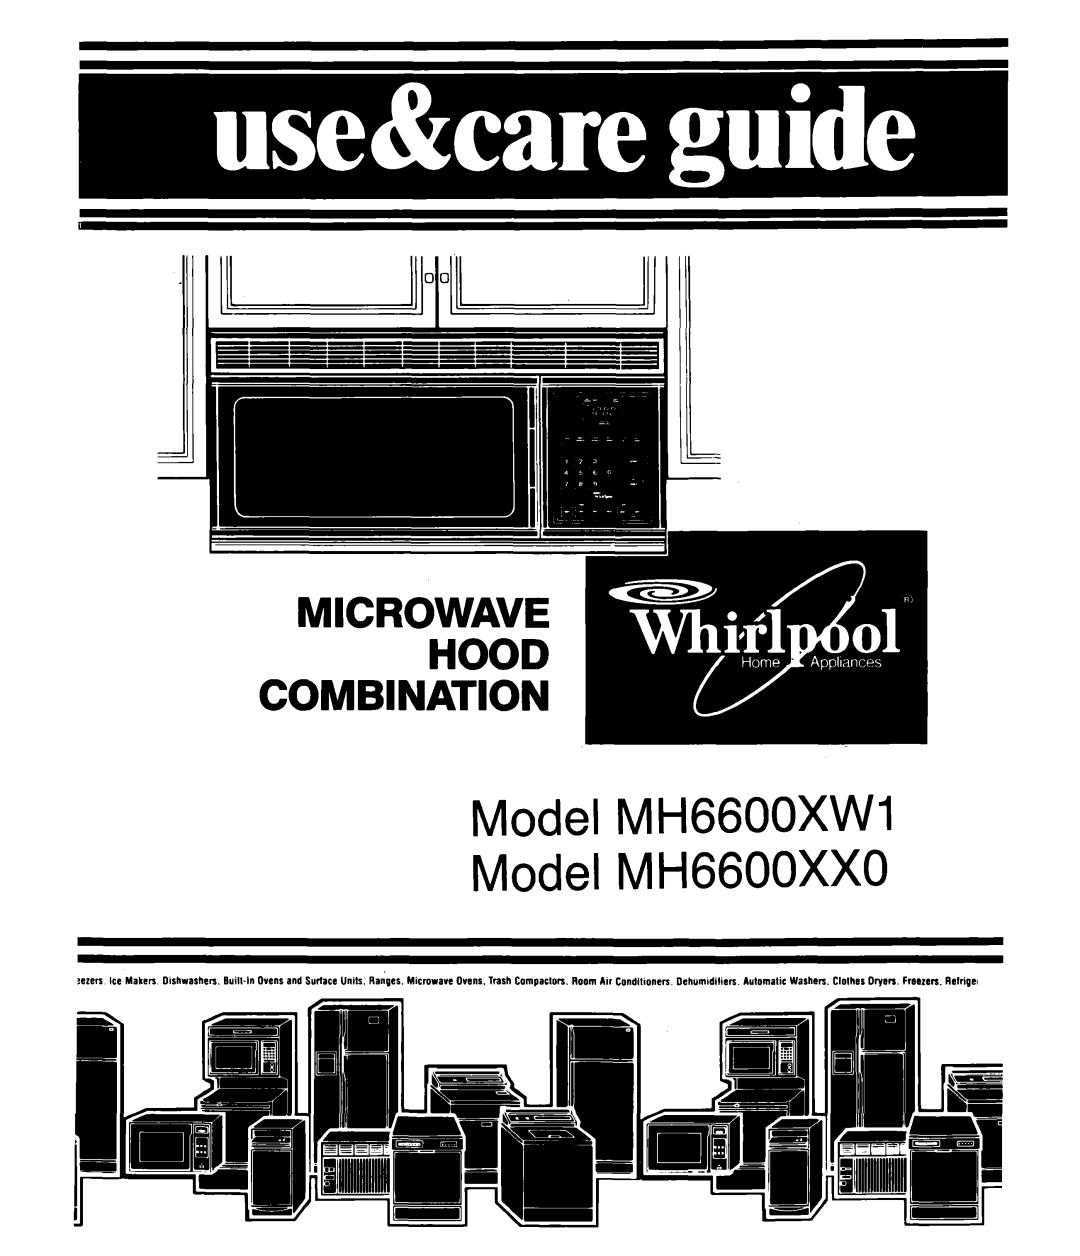 Whirlpool manual Model MH6600XWl Model MH66OOXXO, Microwave Combination 